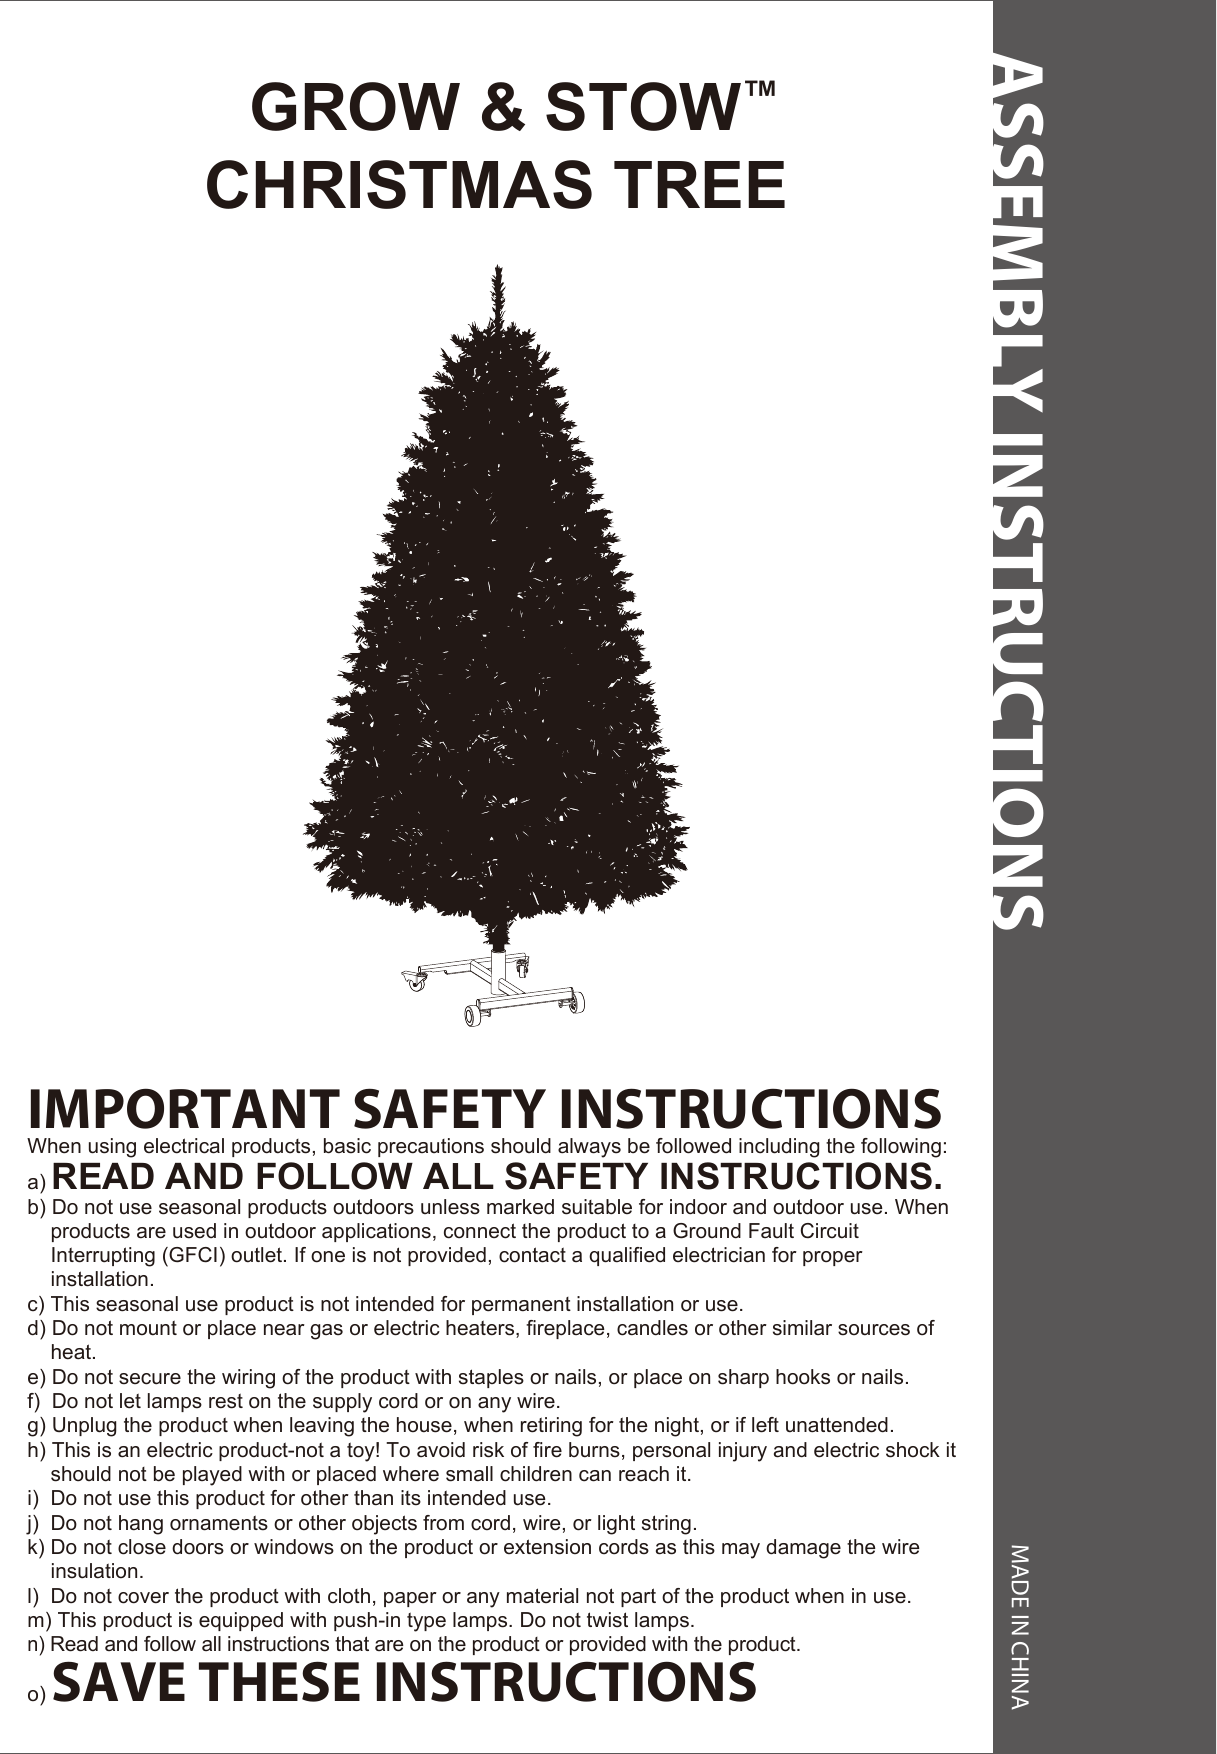 ASSEMBLY INSTRUCTIONS MADE IN CHINA  GROW &amp; STOW™CHRISTMAS TREEIMPORTANT SAFETY INSTRUCTIONSWhen using electrical products, basic precautions should always be followed including the following:a) READ AND FOLLOW ALL SAFETY INSTRUCTIONS.b) Do not use seasonal products outdoors unless marked suitable for indoor and outdoor use. When     products are used in outdoor applications, connect the product to a Ground Fault Circuit     Interrupting (GFCI) outlet. If one is not provided, contact a qualified electrician for proper     installation.c) This seasonal use product is not intended for permanent installation or use.d) Do not mount or place near gas or electric heaters, fireplace, candles or other similar sources of    heat.e) Do not secure the wiring of the product with staples or nails, or place on sharp hooks or nails.f)  Do not let lamps rest on the supply cord or on any wire.g) Unplug the product when leaving the house, when retiring for the night, or if left unattended.h) This is an electric product-not a toy! To avoid risk of fire burns, personal injury and electric shock it     should not be played with or placed where small children can reach it.i)  Do not use this product for other than its intended use.j)  Do not hang ornaments or other objects from cord, wire, or light string.k) Do not close doors or windows on the product or extension cords as this may damage the wire      insulation.l)  Do not cover the product with cloth, paper or any material not part of the product when in use.m) This product is equipped with push-in type lamps. Do not twist lamps.n) Read and follow all instructions that are on the product or provided with the product.o) SAVE THESE INSTRUCTIONS 